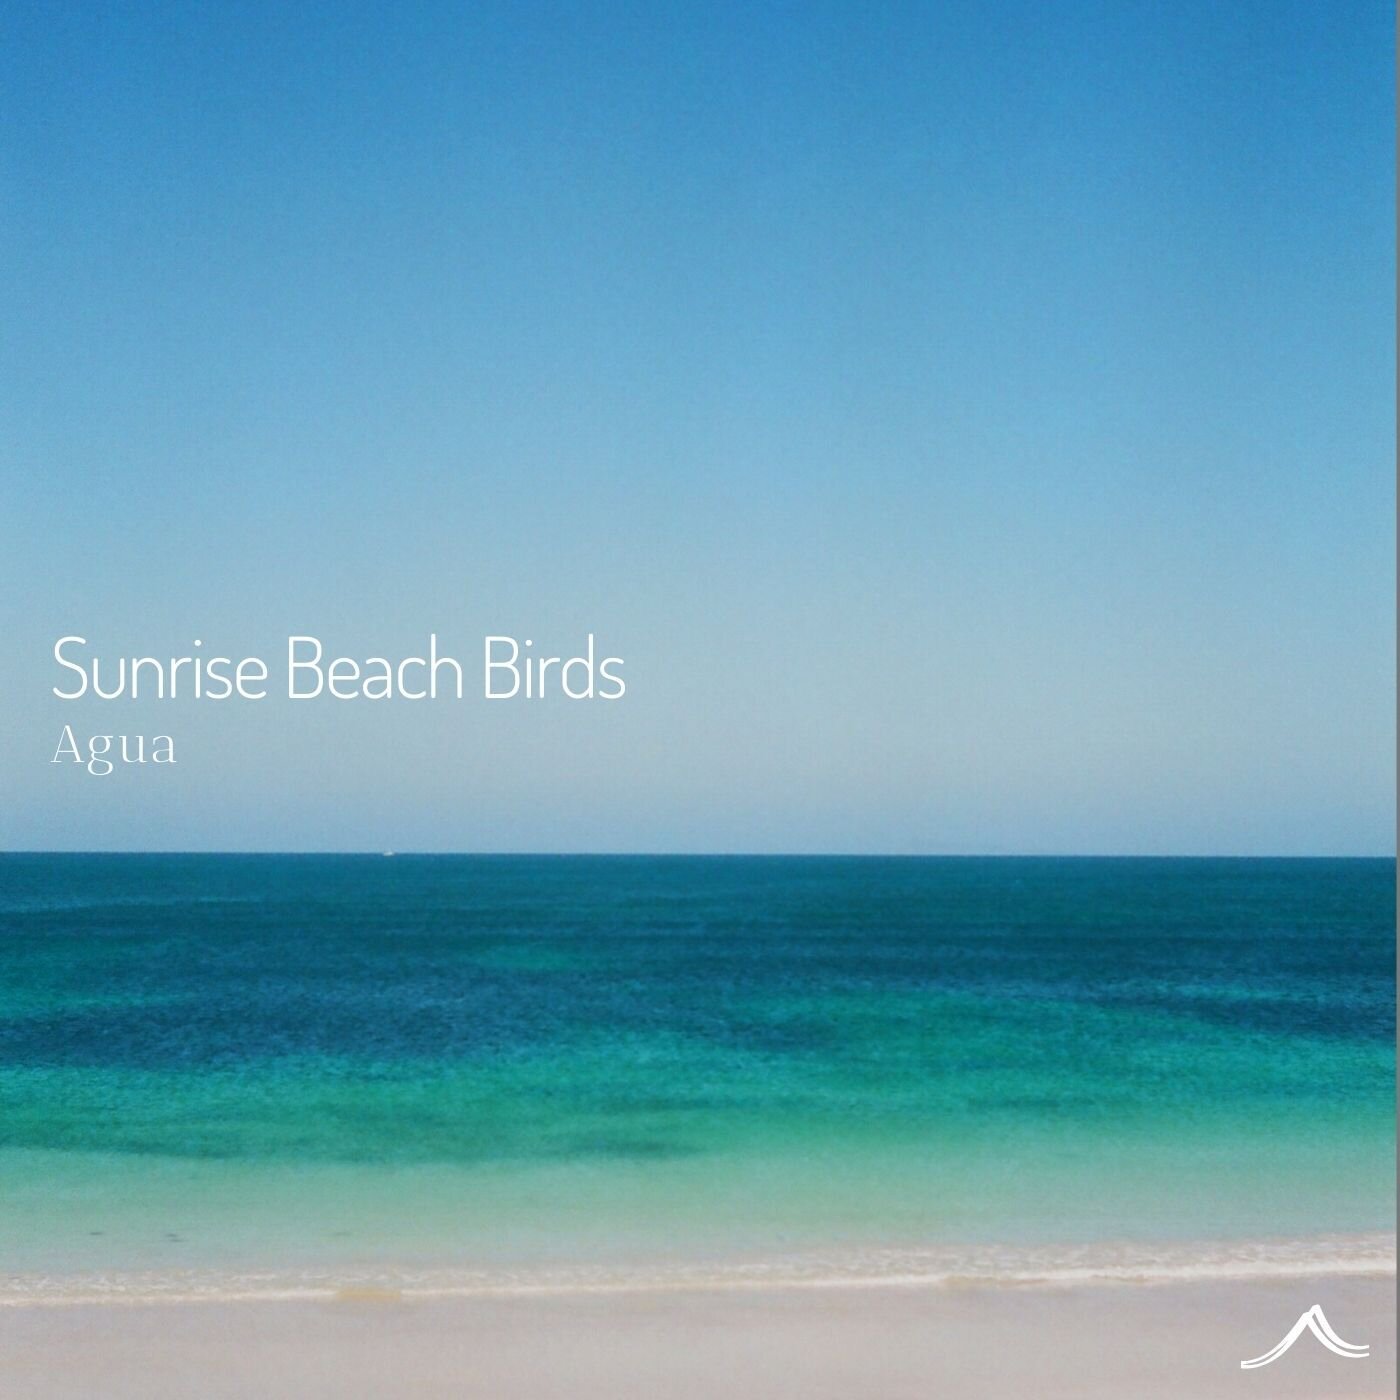 🌅 Dive into my new track 'Sunrise Beach Birds' capturing the sounds in Noosa.

Capturing the sounds of dawn at Noosa's tranquil shores, this track is a symphony of birds greeting the sunrise, harmonising with the rhythmic waves in the distance.

Lis